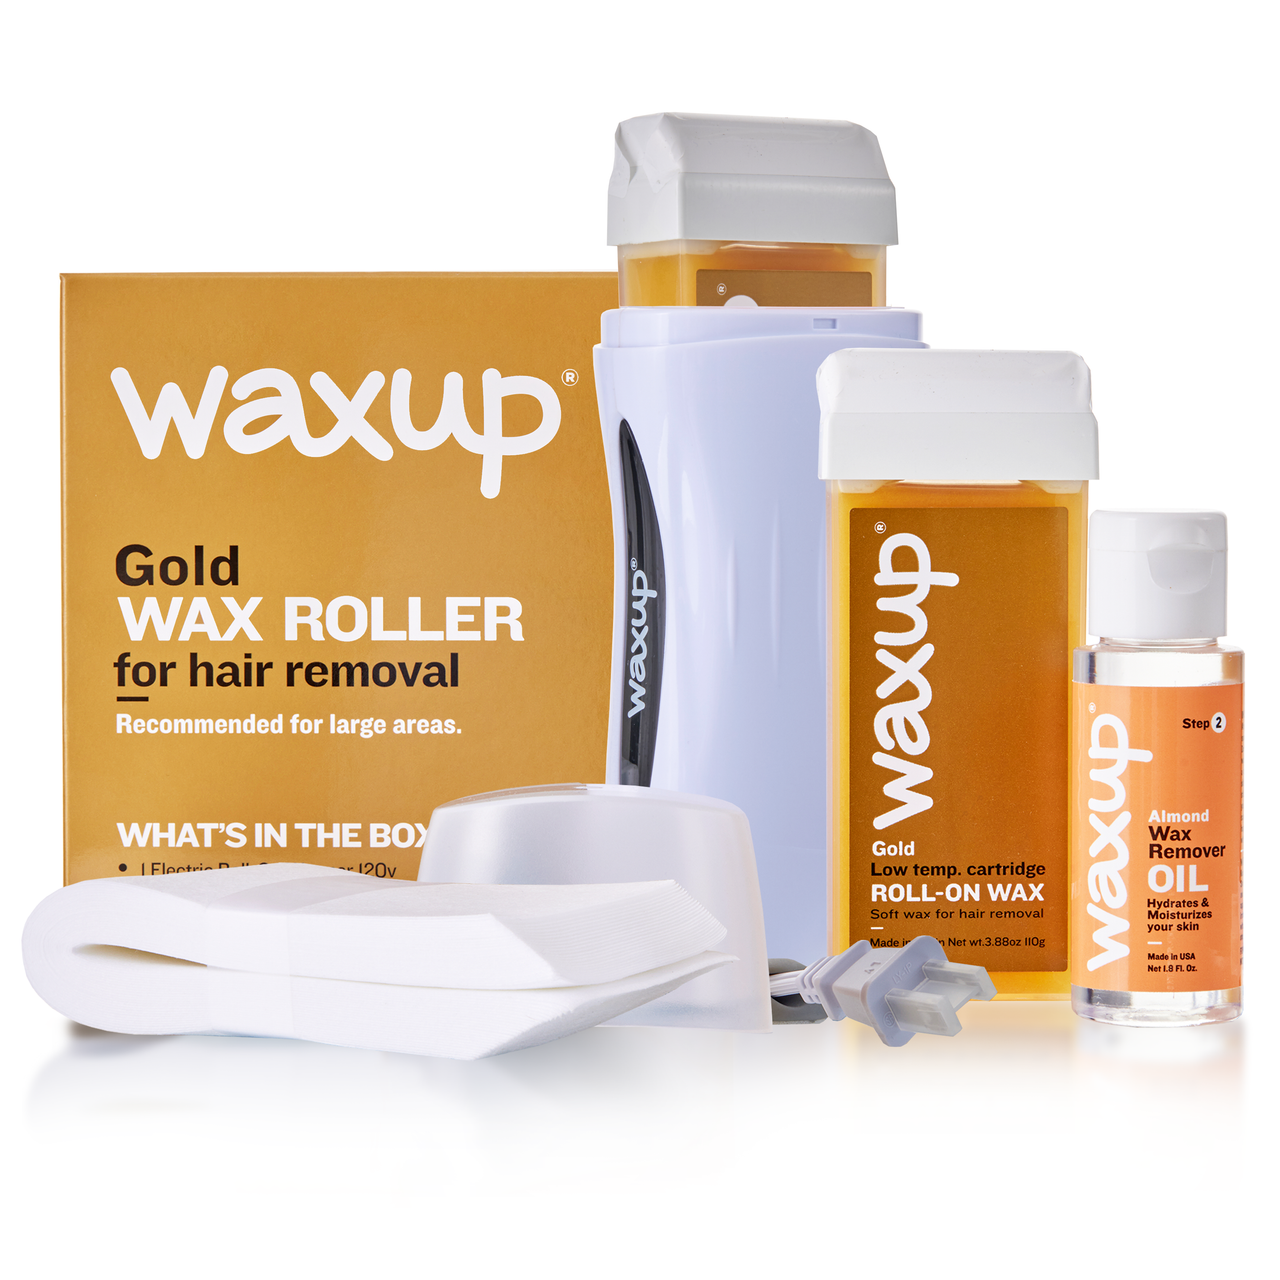 Elite Gold Roller Waxing Kit Buy with Prime - thatswaxup -  - Roller Waxing Kit - waxup hair removal wax body waxing kit women and men professional waxing supplies